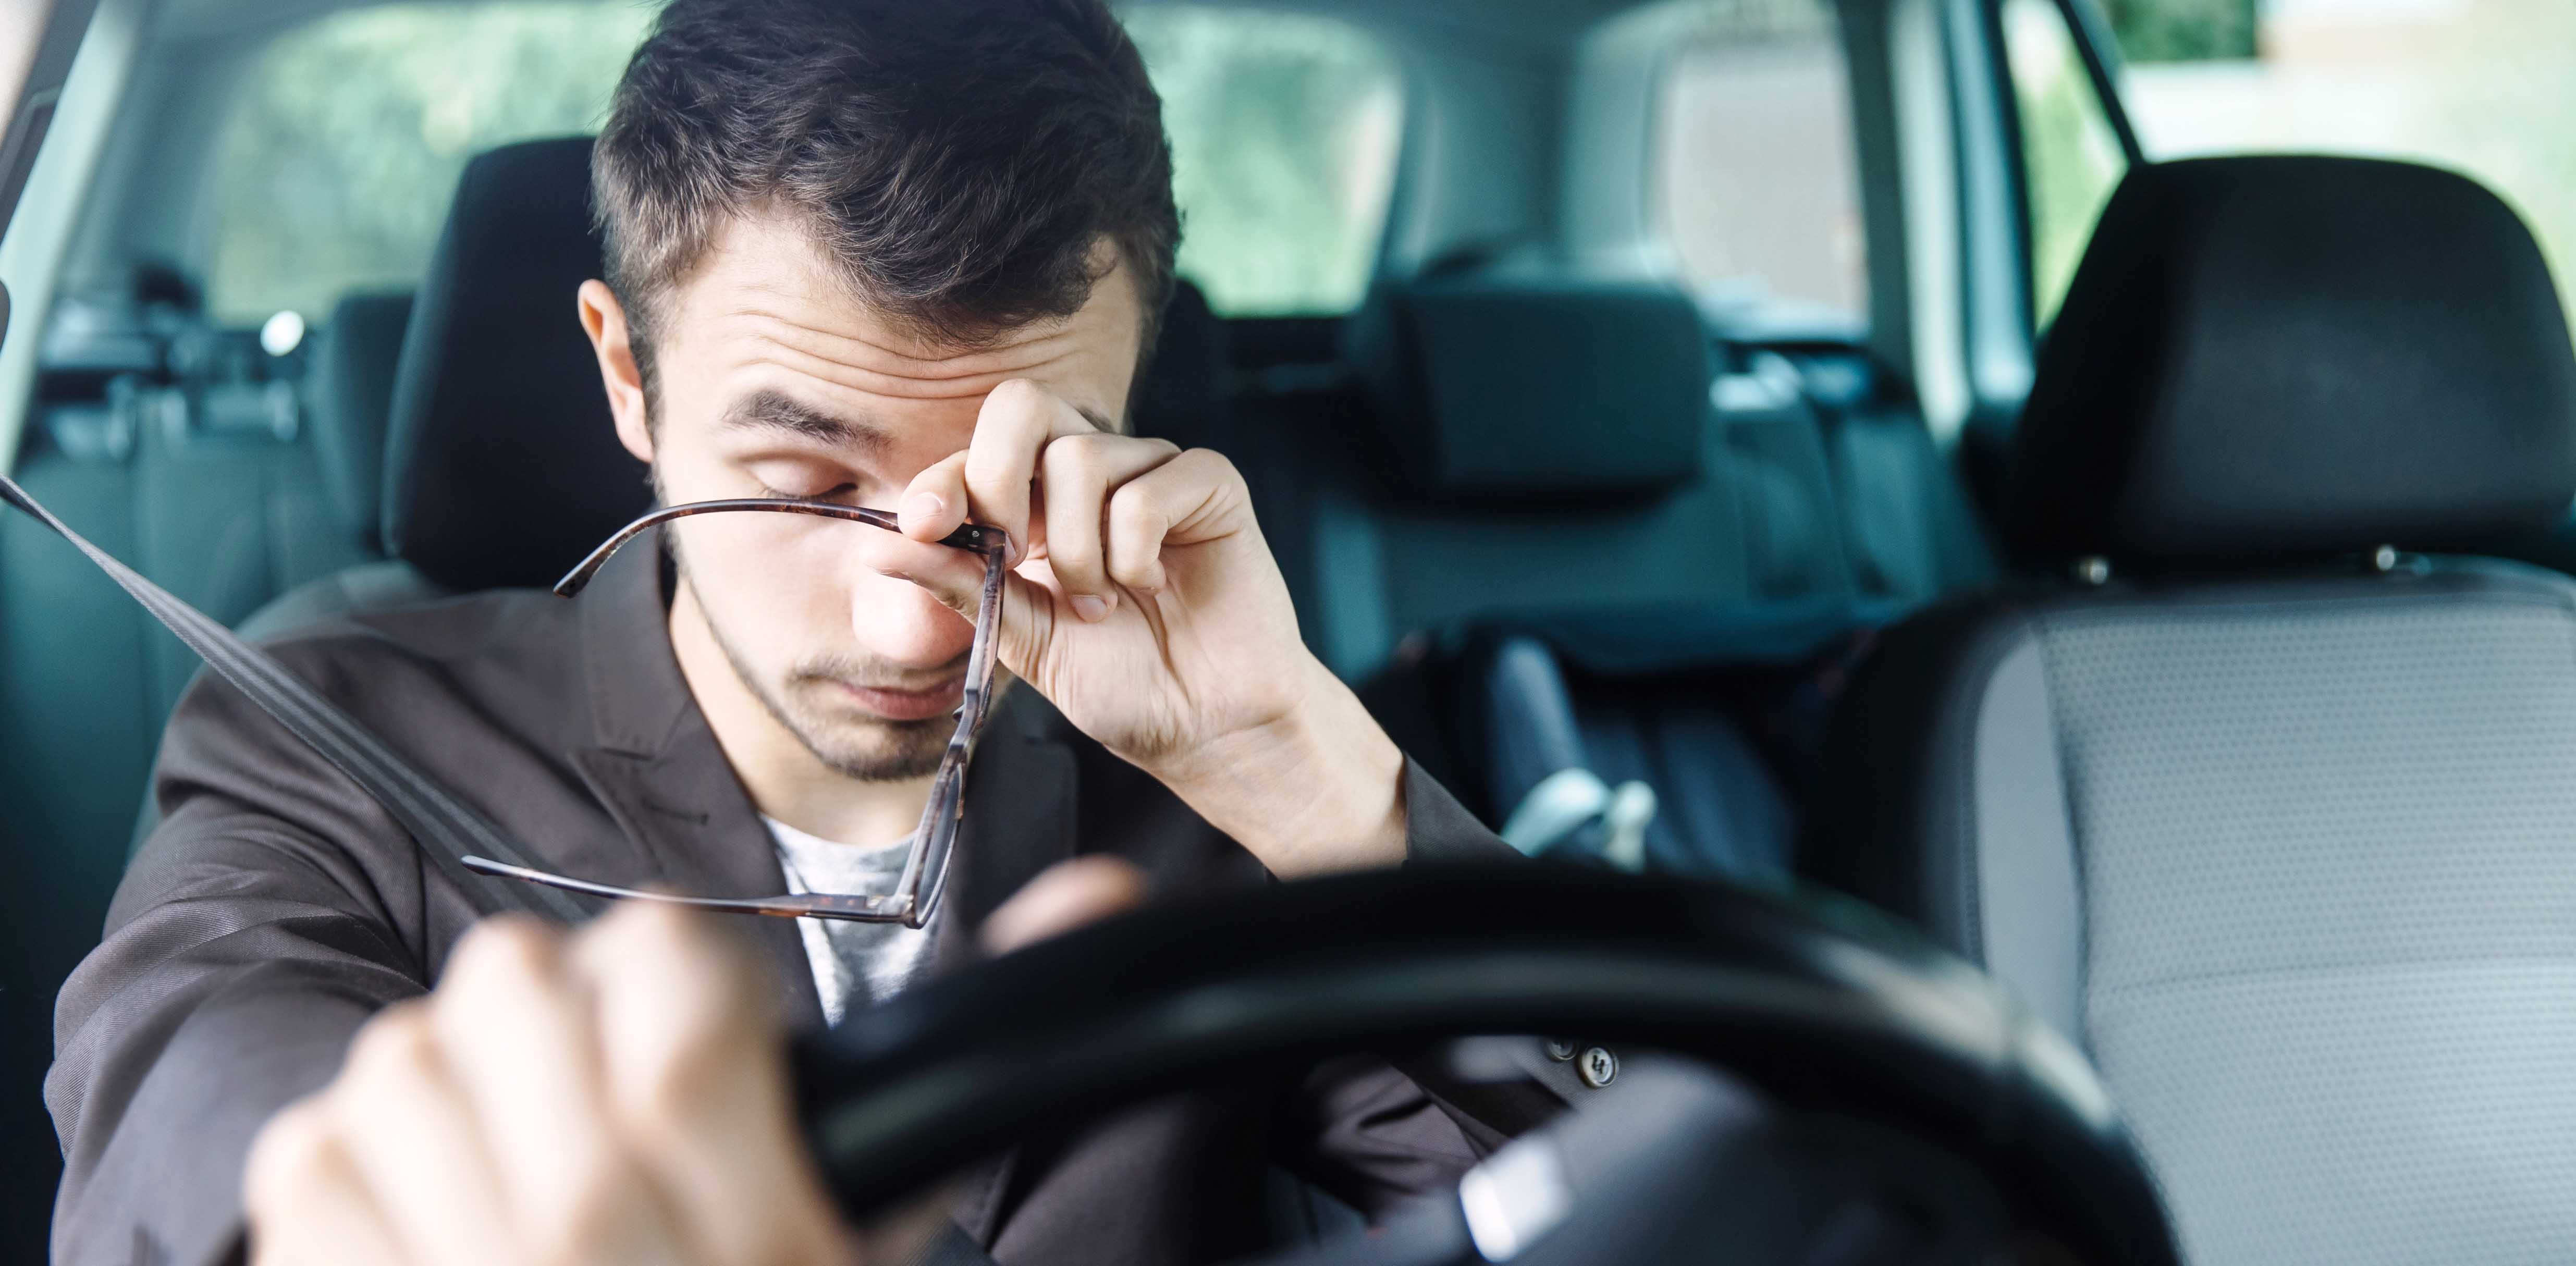 What can a driver do to control emotions while driving?